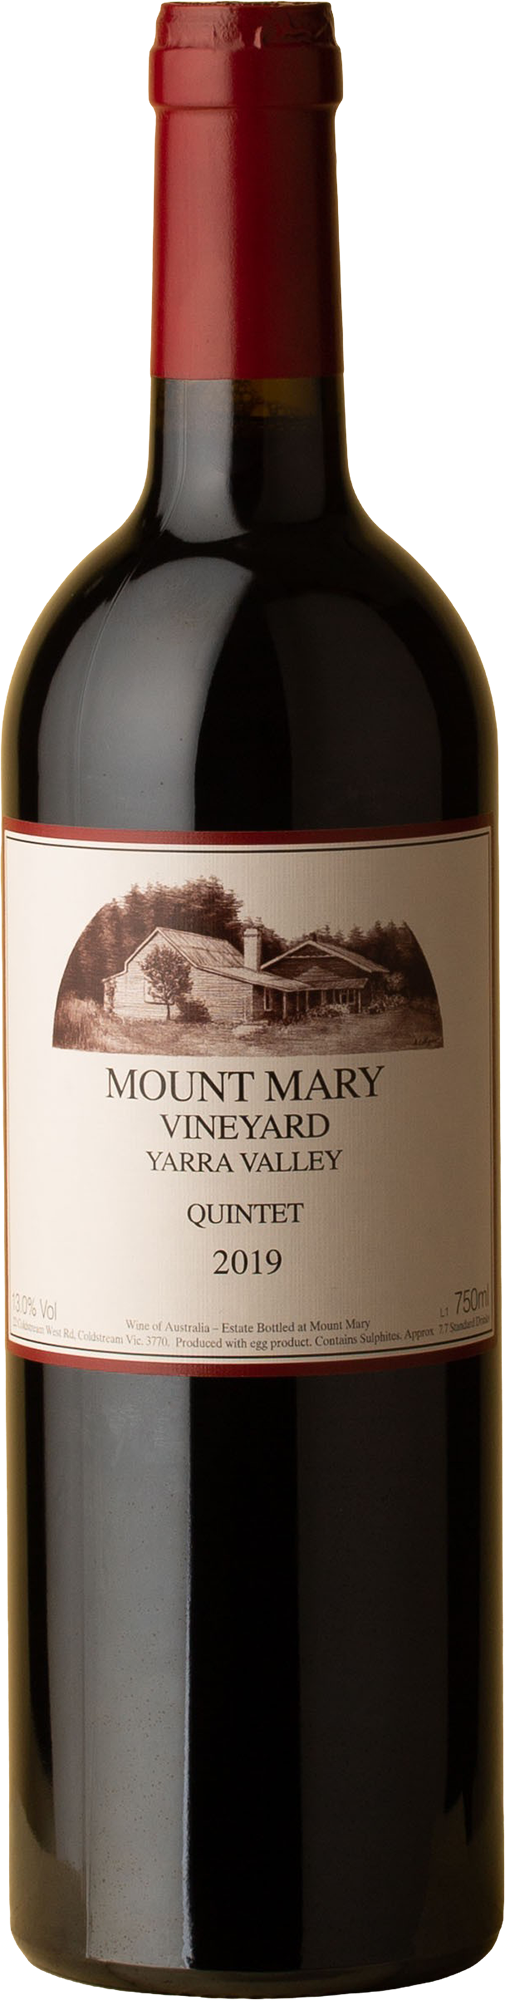 Mount Mary - Quintet Cabernet Blend 2019 Red Wine